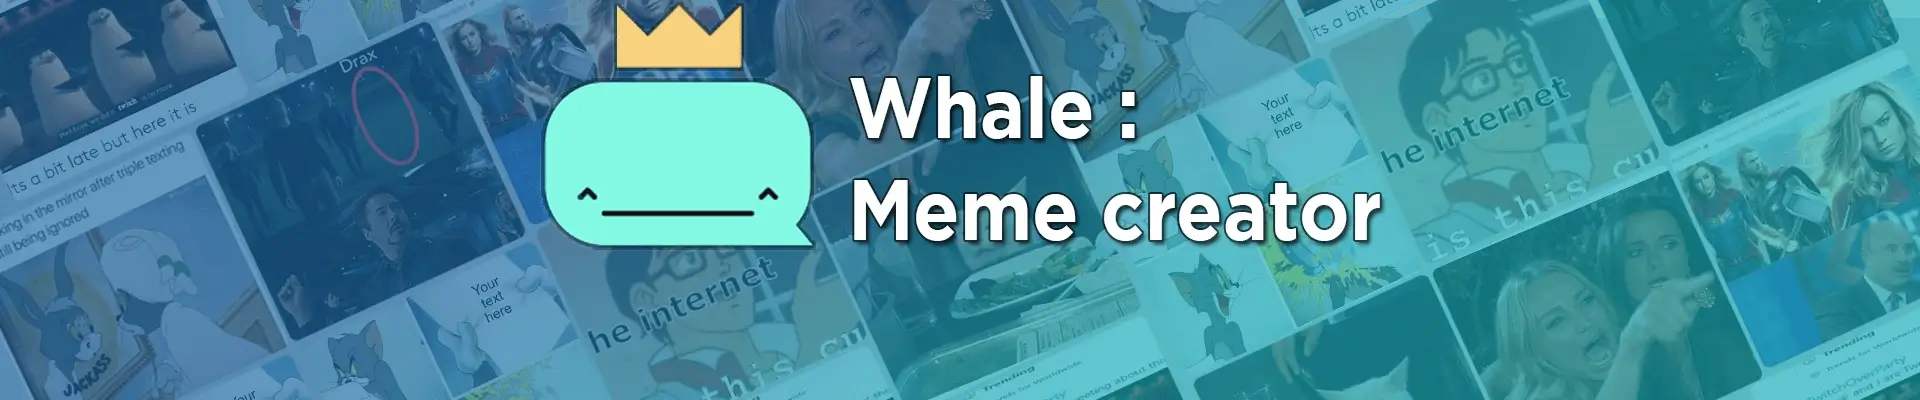 Introducing Facebook's Meme-Making App 'Whale' By The NPE Team On The IOS App Store.